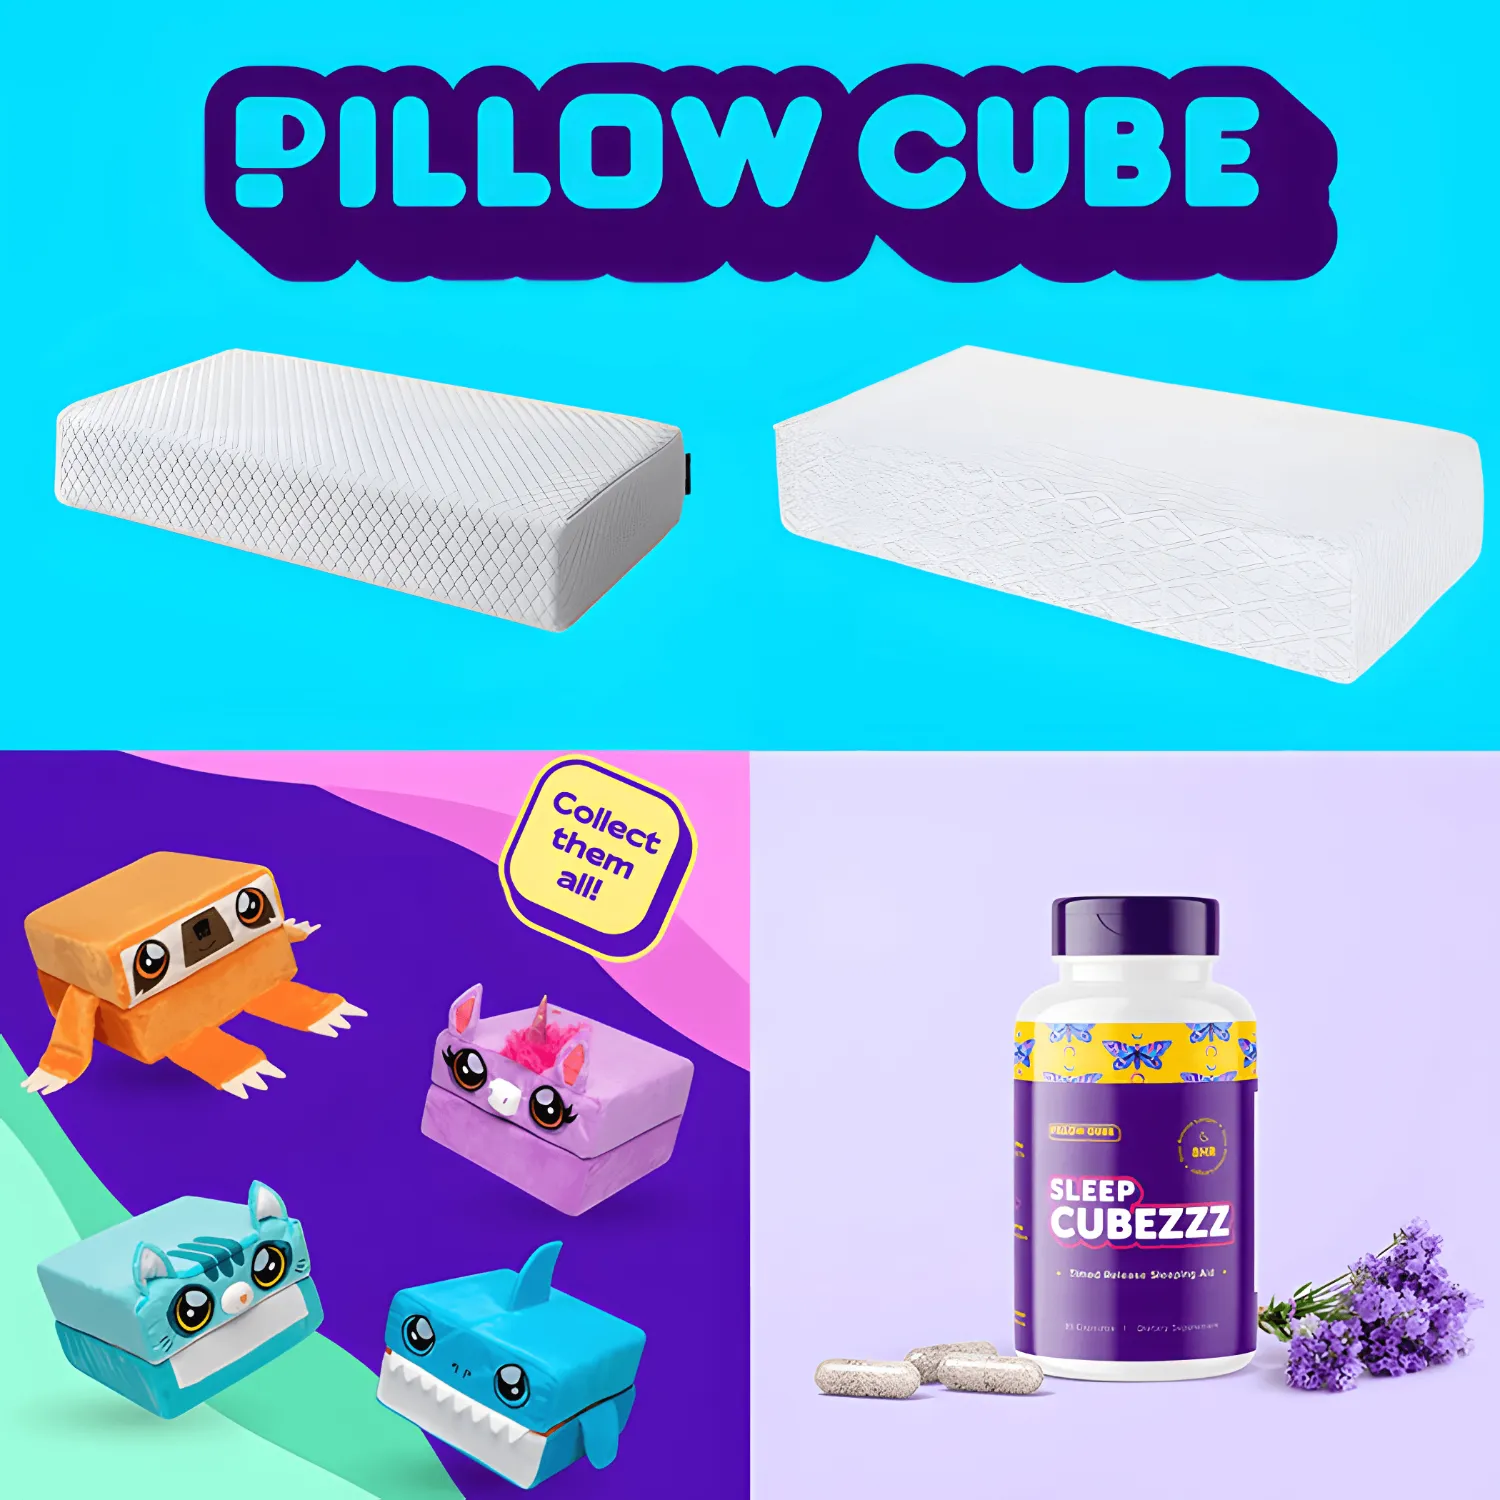 Free Pillow Cube Sleep Products